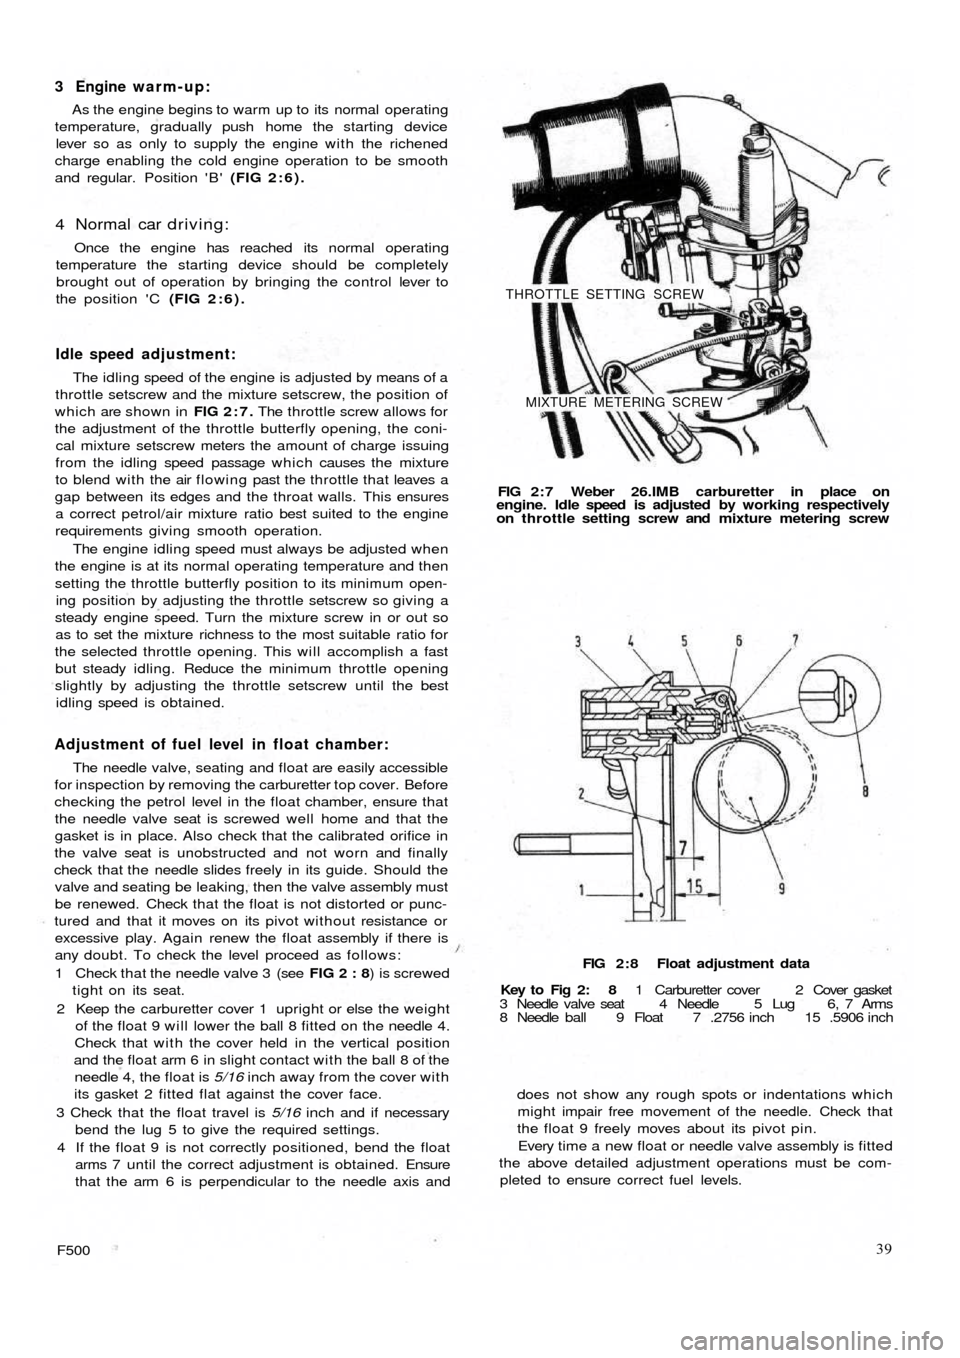 FIAT 500 1959 1.G Workshop Manual 3 Engine warm-up:
As the  engine begins to warm up to its normal operating
temperature, gradually push home the starting device
lever so as only to supply the engine with the richened
charge enabling 